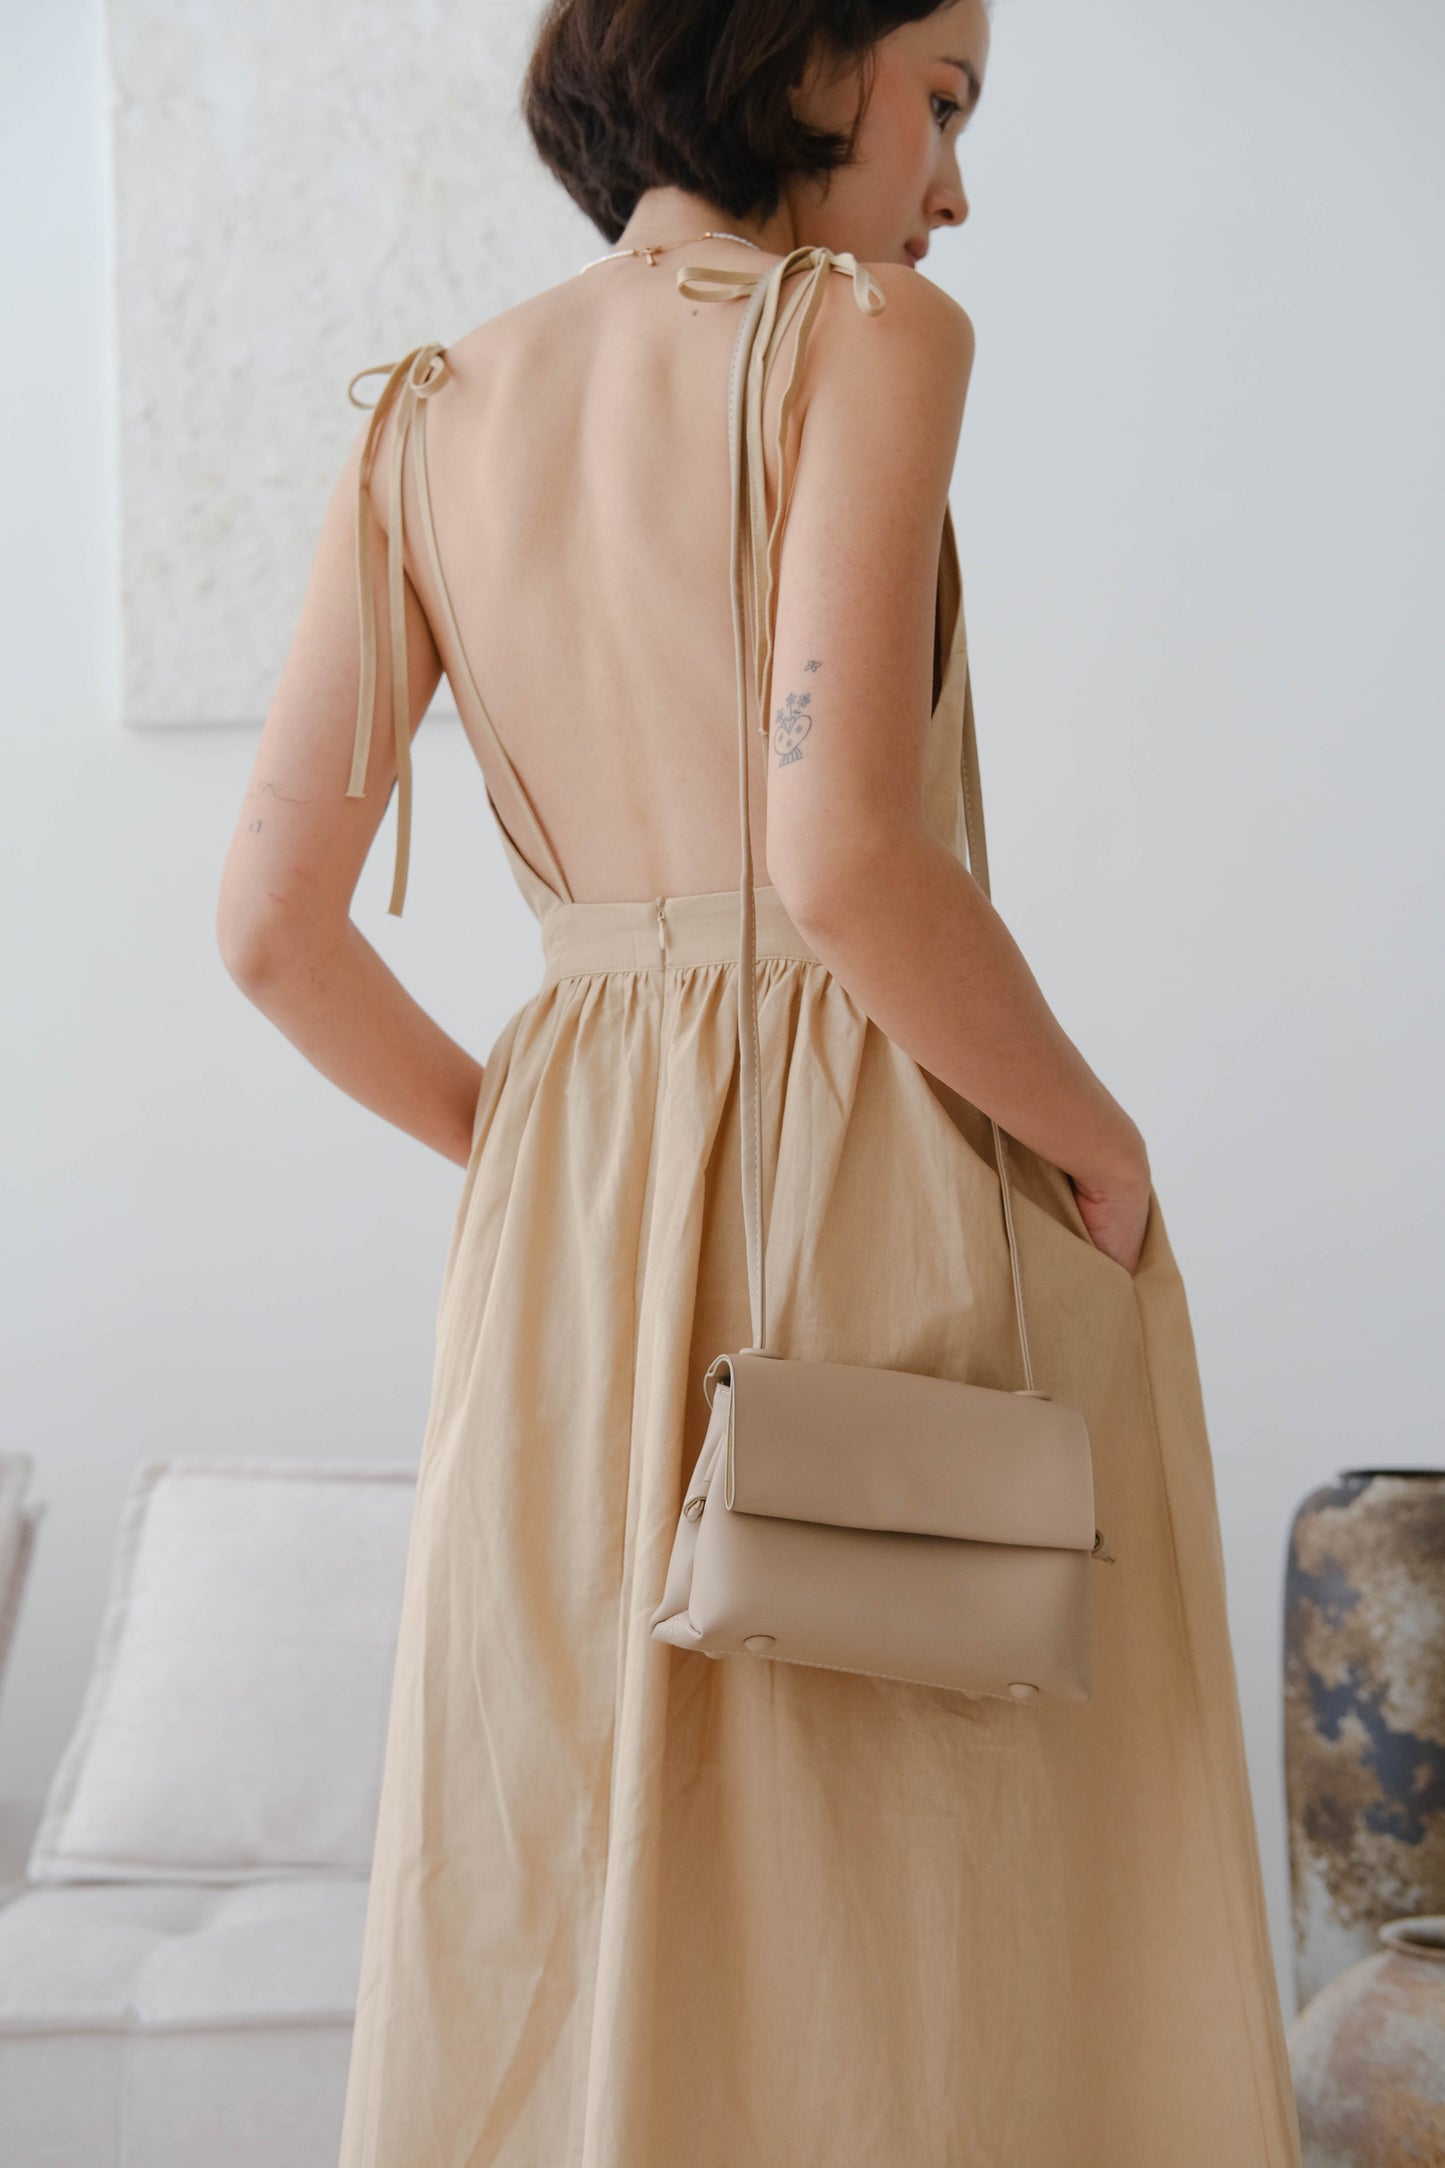 French cotton and linen high waist dress in khaki